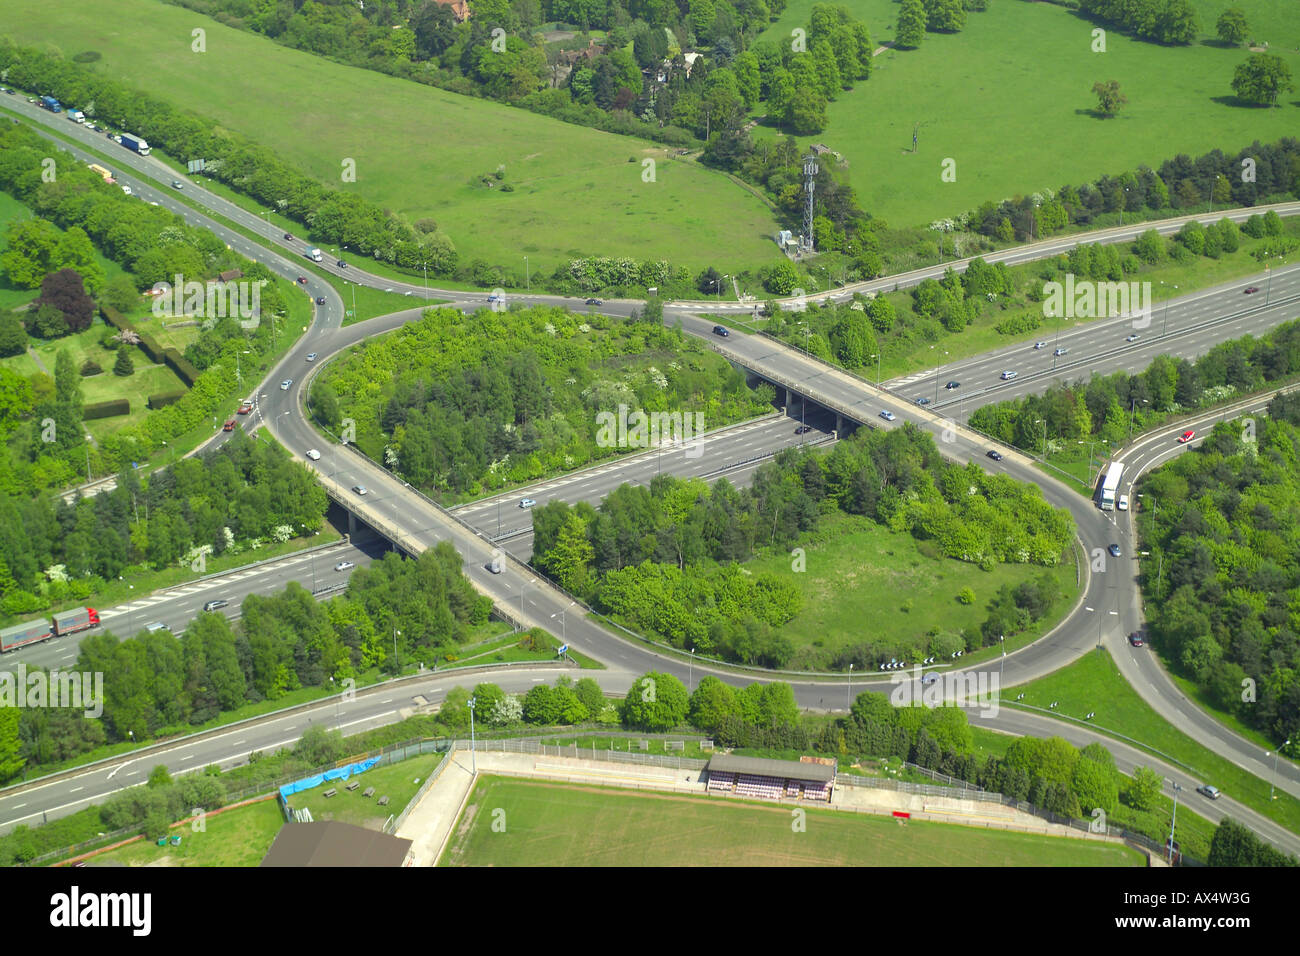 Aerial view of a motorway junction where the M40 junction meets the ...